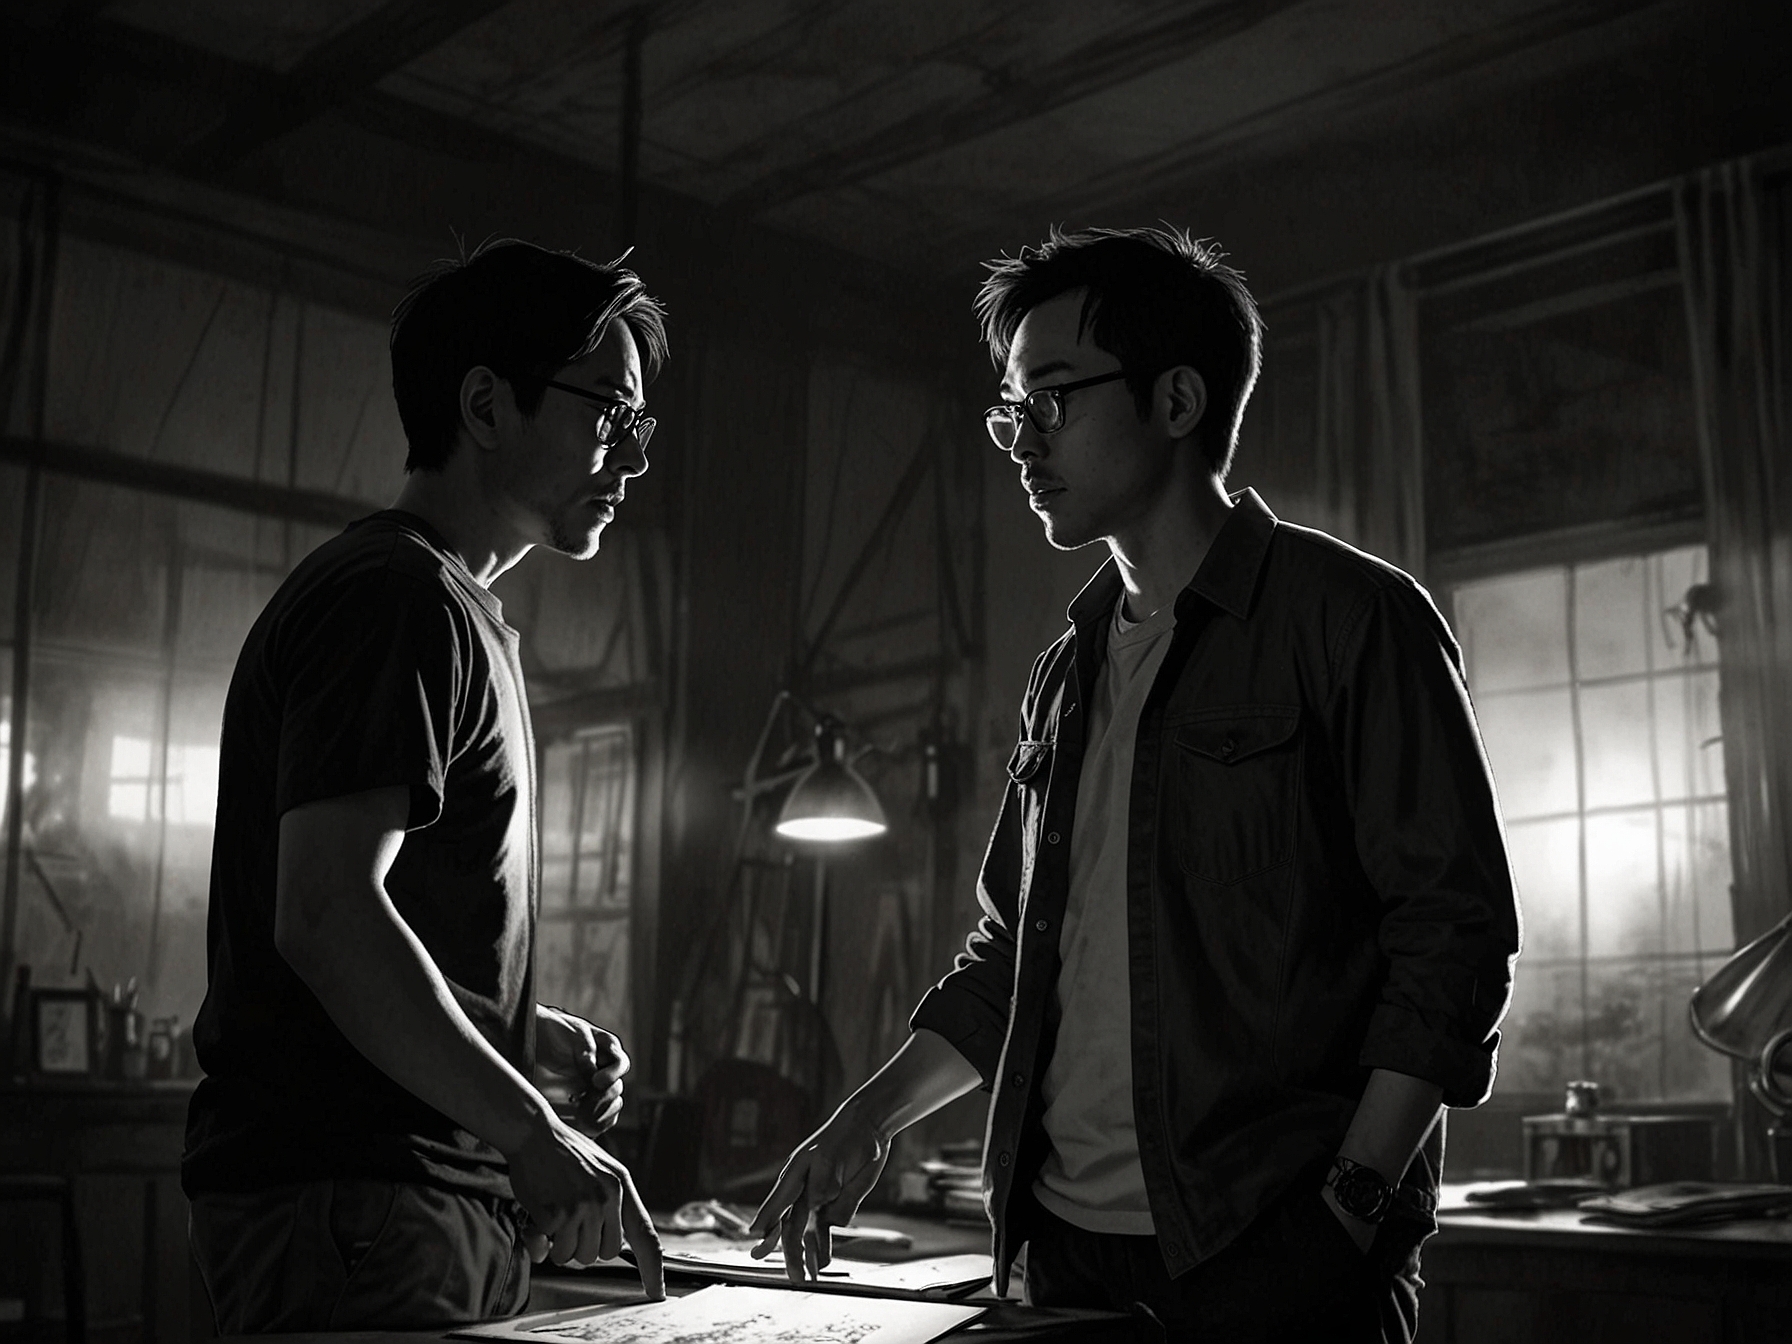 Directors James Wan and Osgood Perkins discussing scenes on a dimly lit, ominous set, indicative of the film's intense and atmospheric setting.